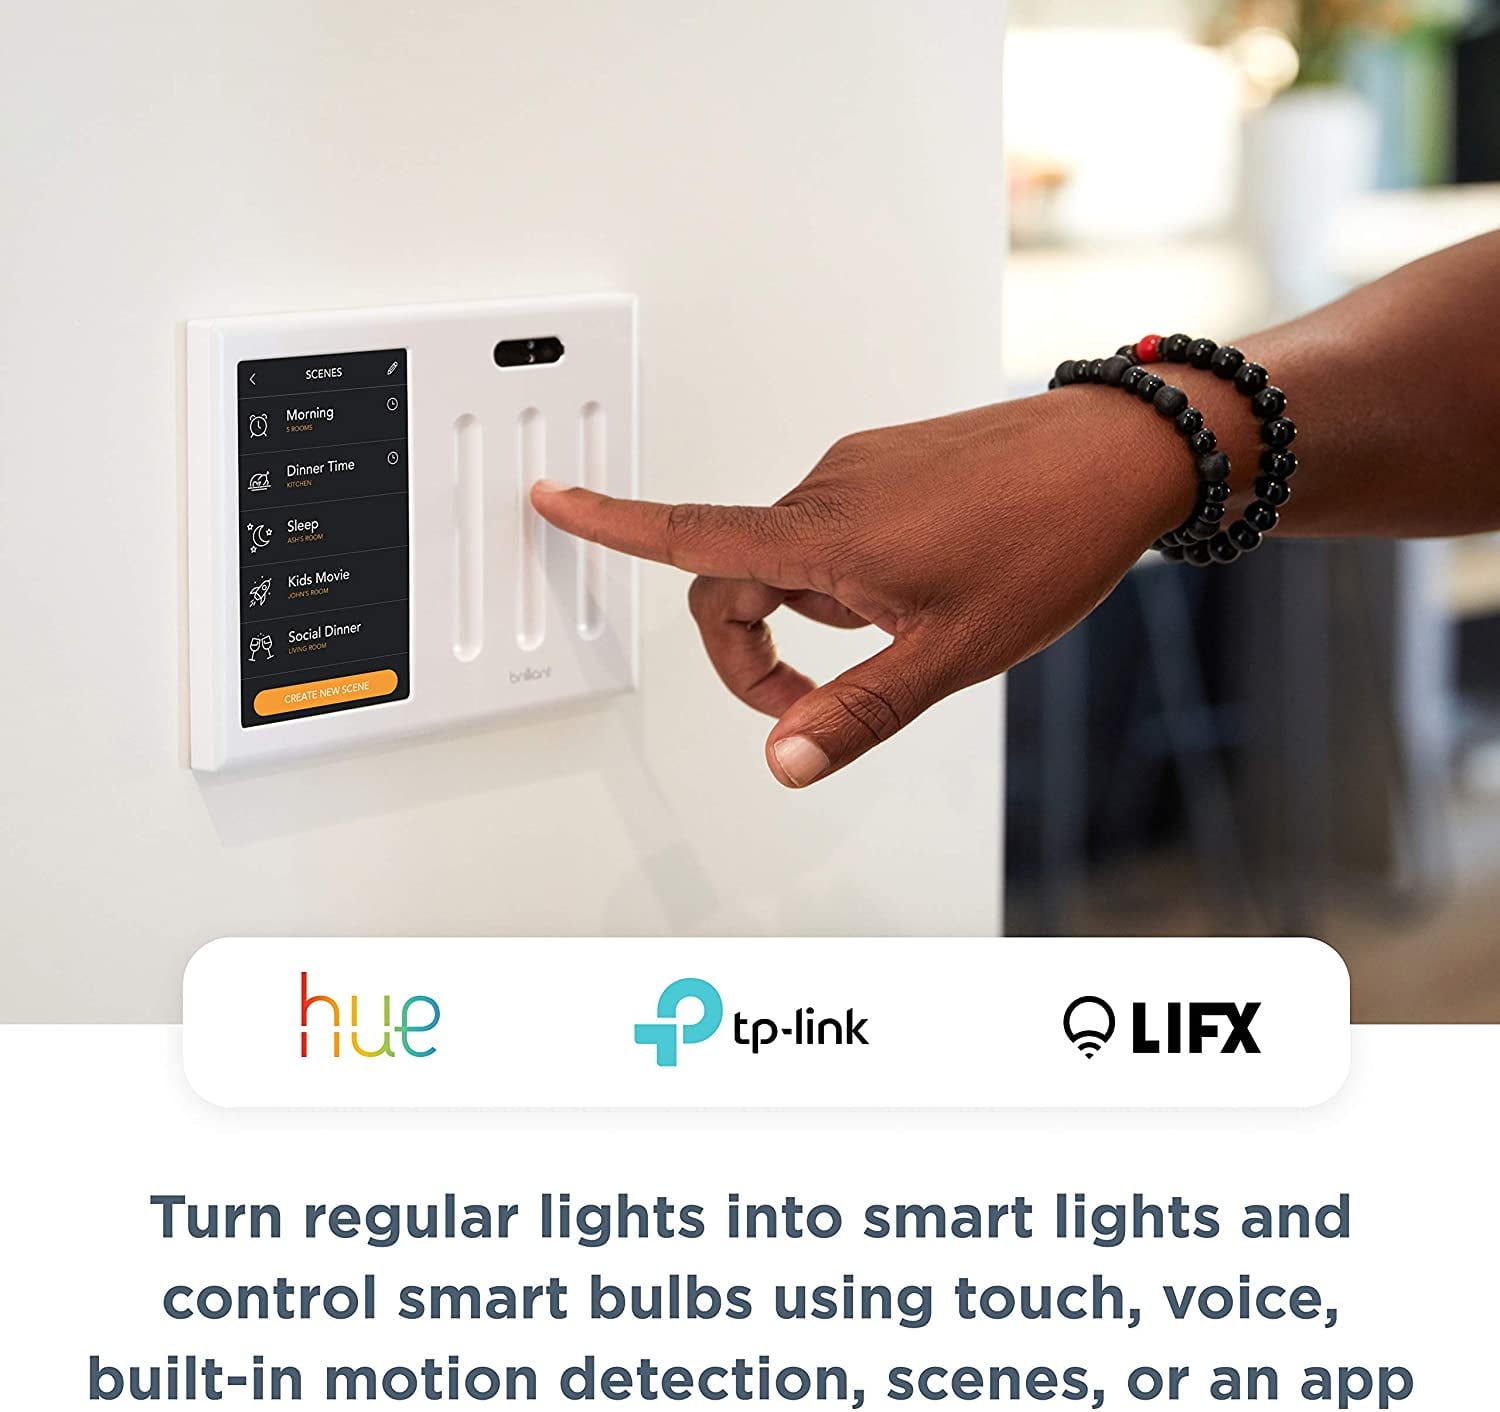 & More SmartThings Google Nest Apple HomeKit — In-Wall Touchscreen Control for Lights — Alexa Built-In & Compatible with Ring Sonos Hue Music 1-Switch Panel Wemo Brilliant Smart Home Control 